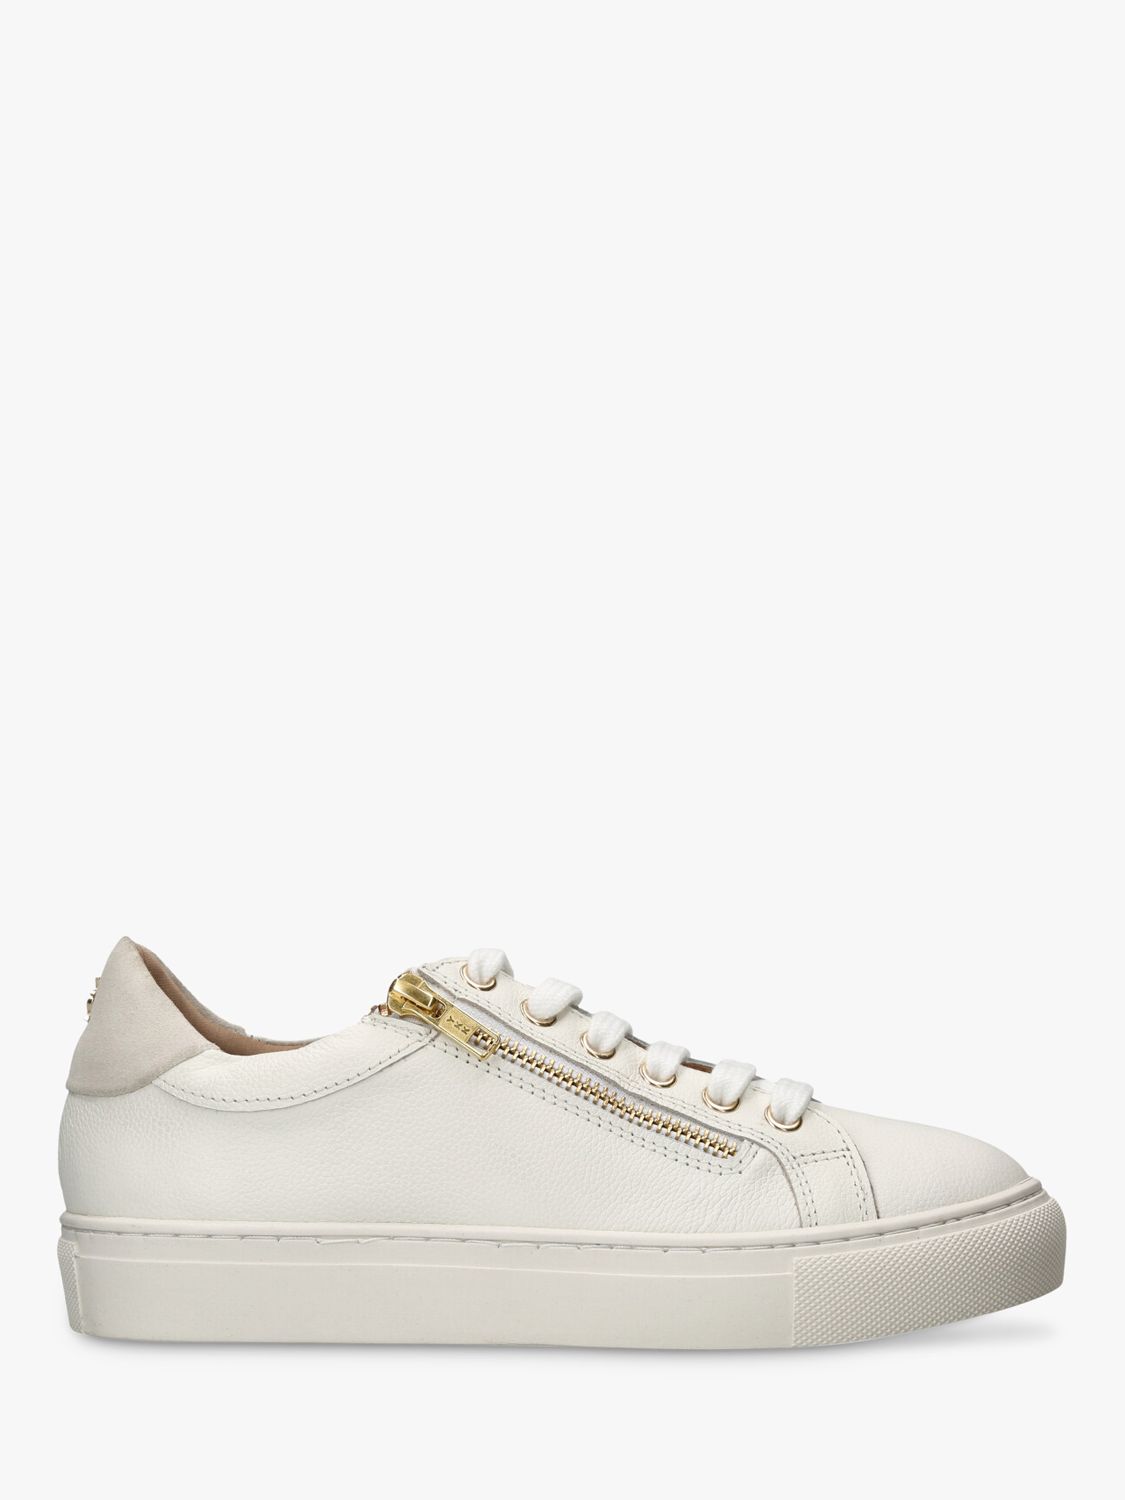 KG Kurt Geiger Dulwich Leather Zip Trainers, White at John Lewis & Partners